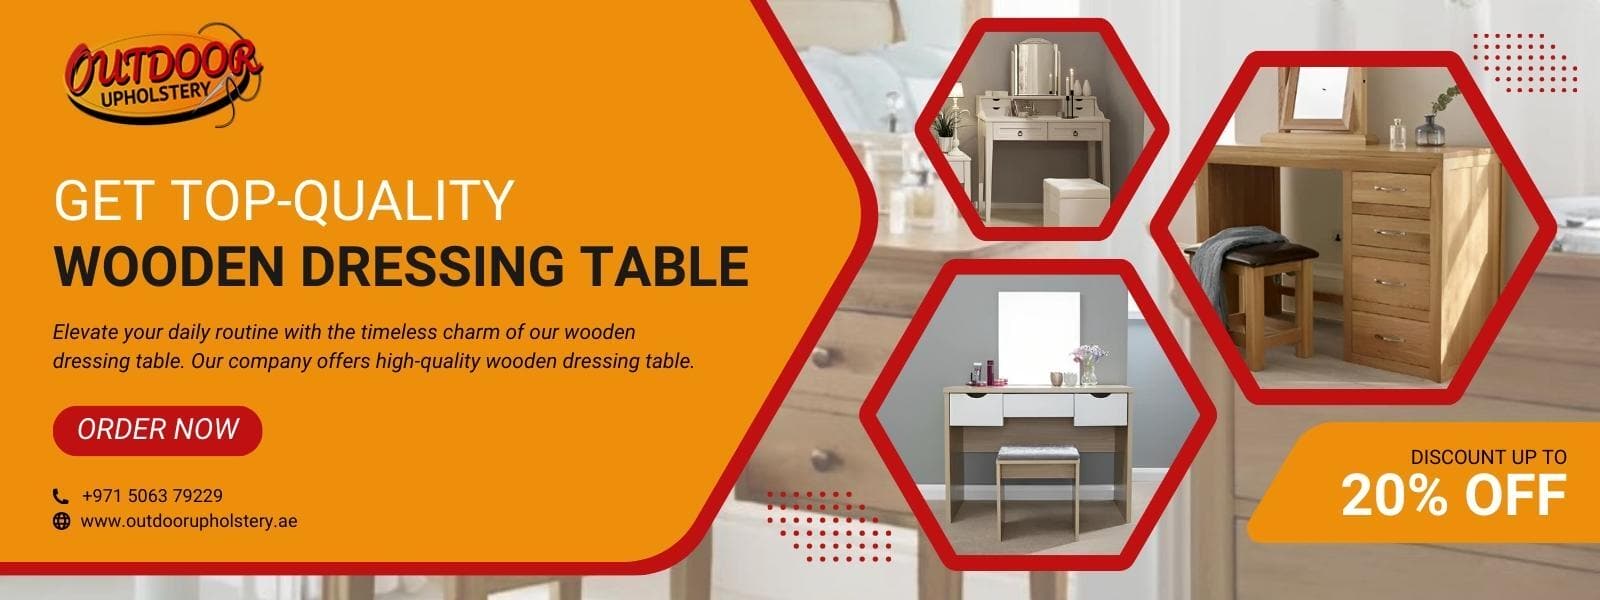 Get Top-quality Wooden Dressing Table